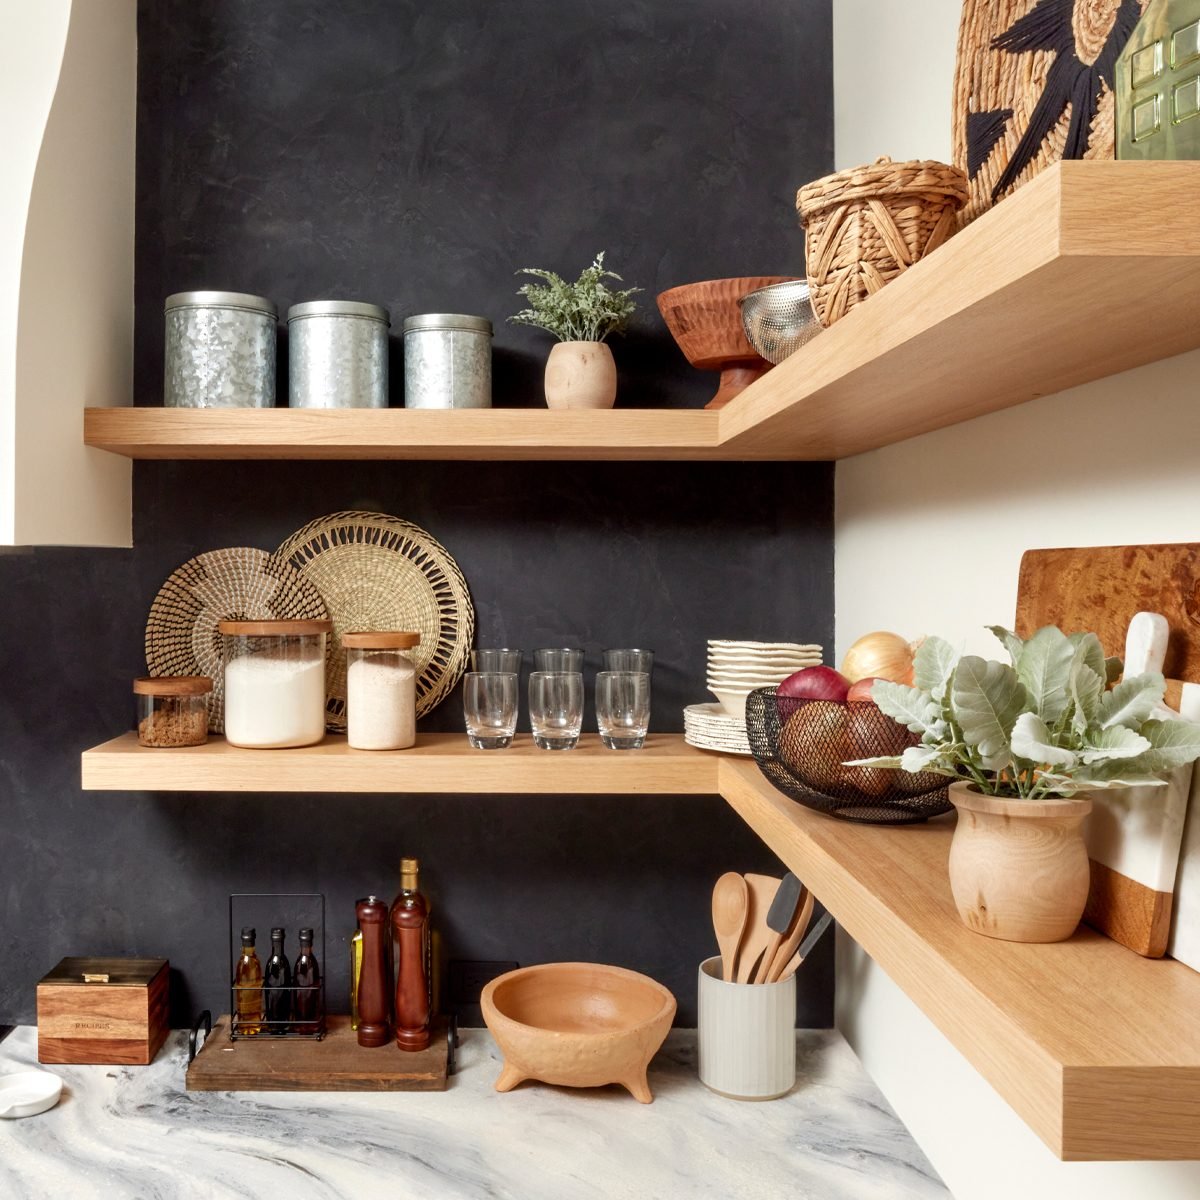 How to build floating corner pantry shelves 